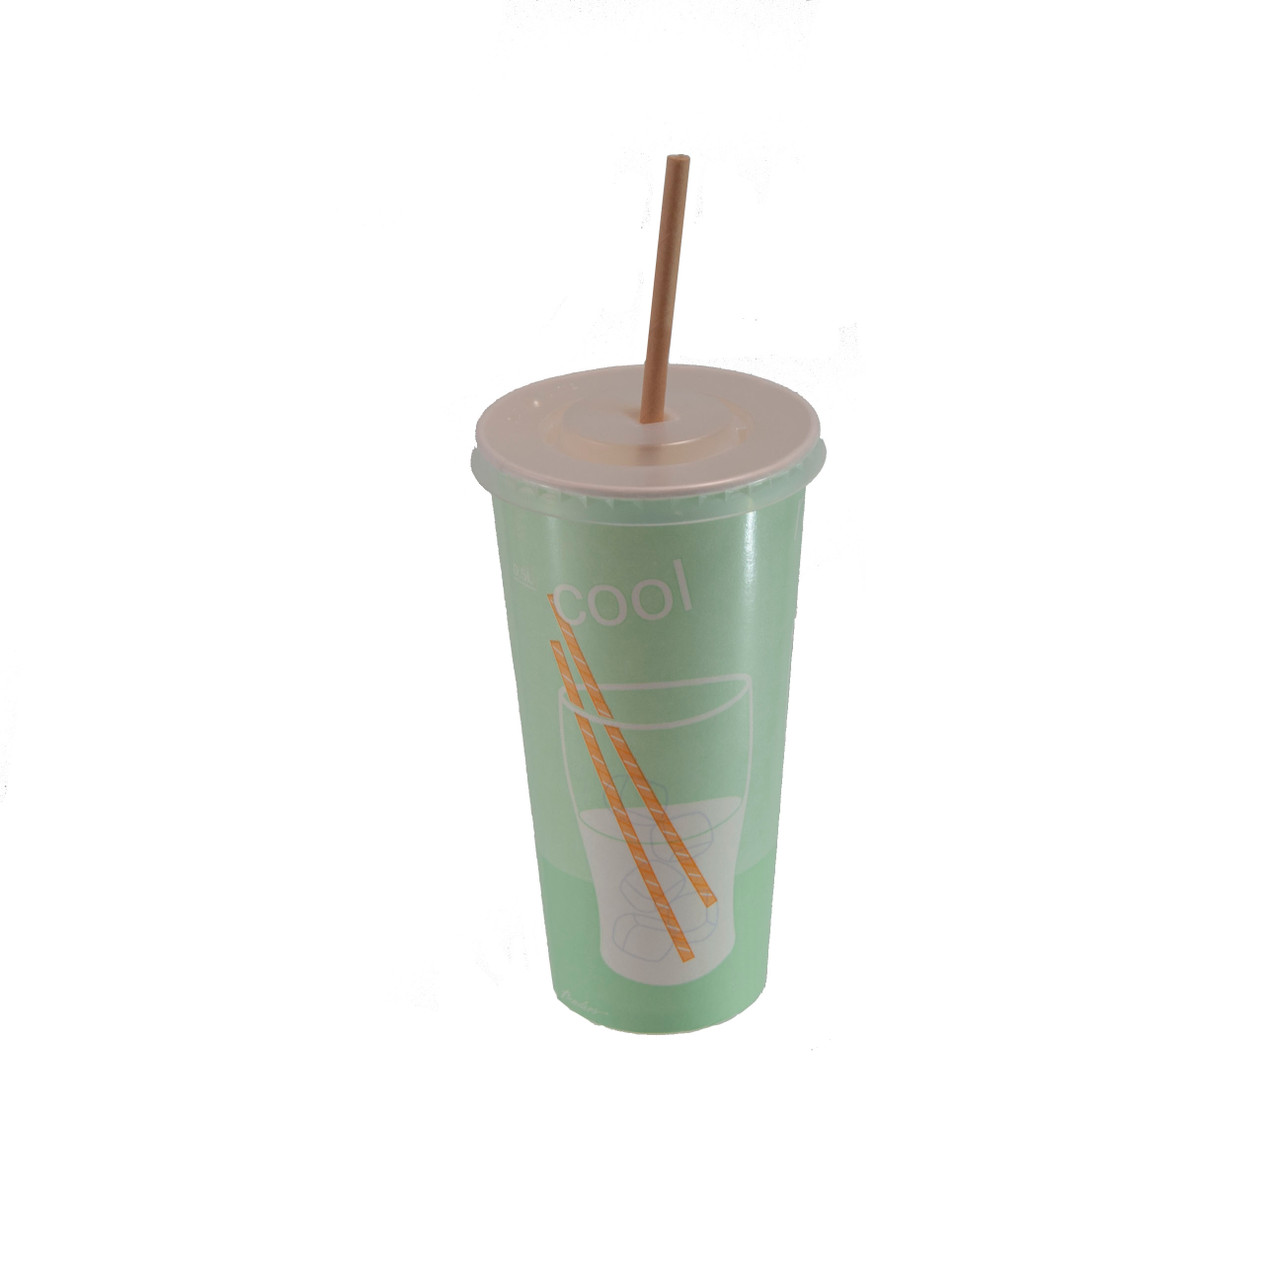 Disposable Smoothie Cups, Domed Lids, Plastic Milkshake Glasses, Glass  Party Cup